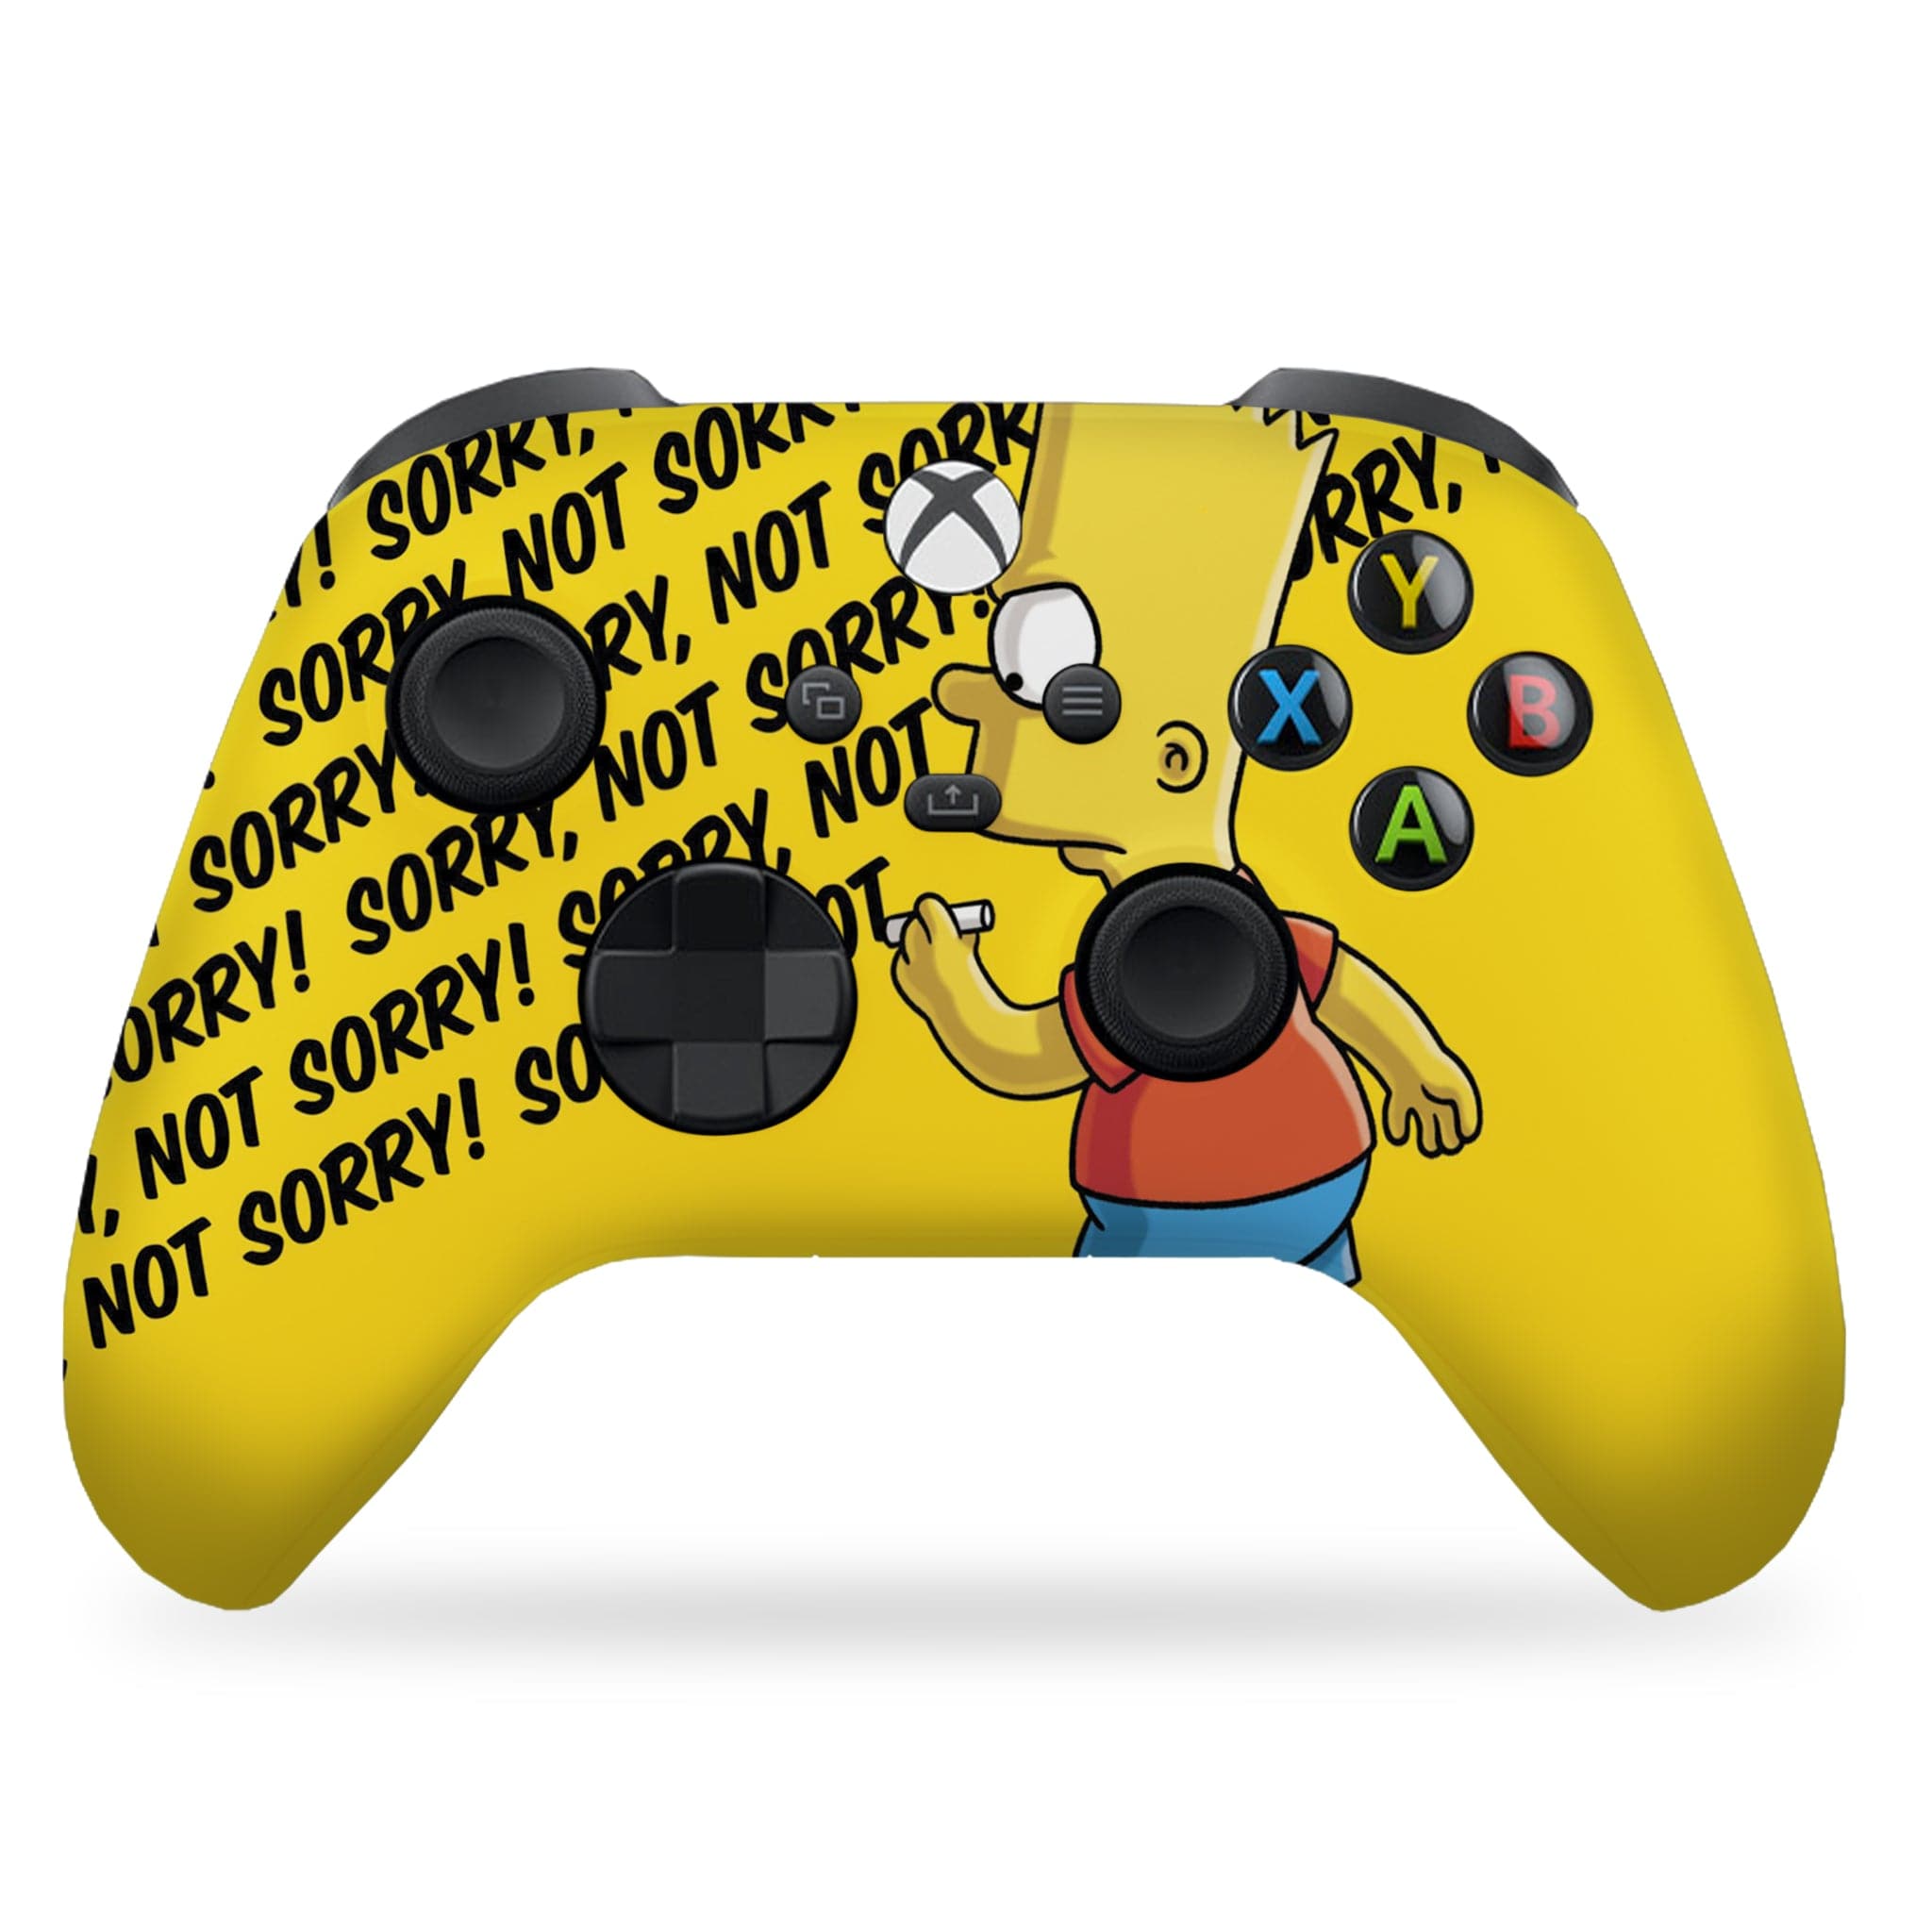 SIMPSONS SORRY NOT SORRY Xbox Series X Controller